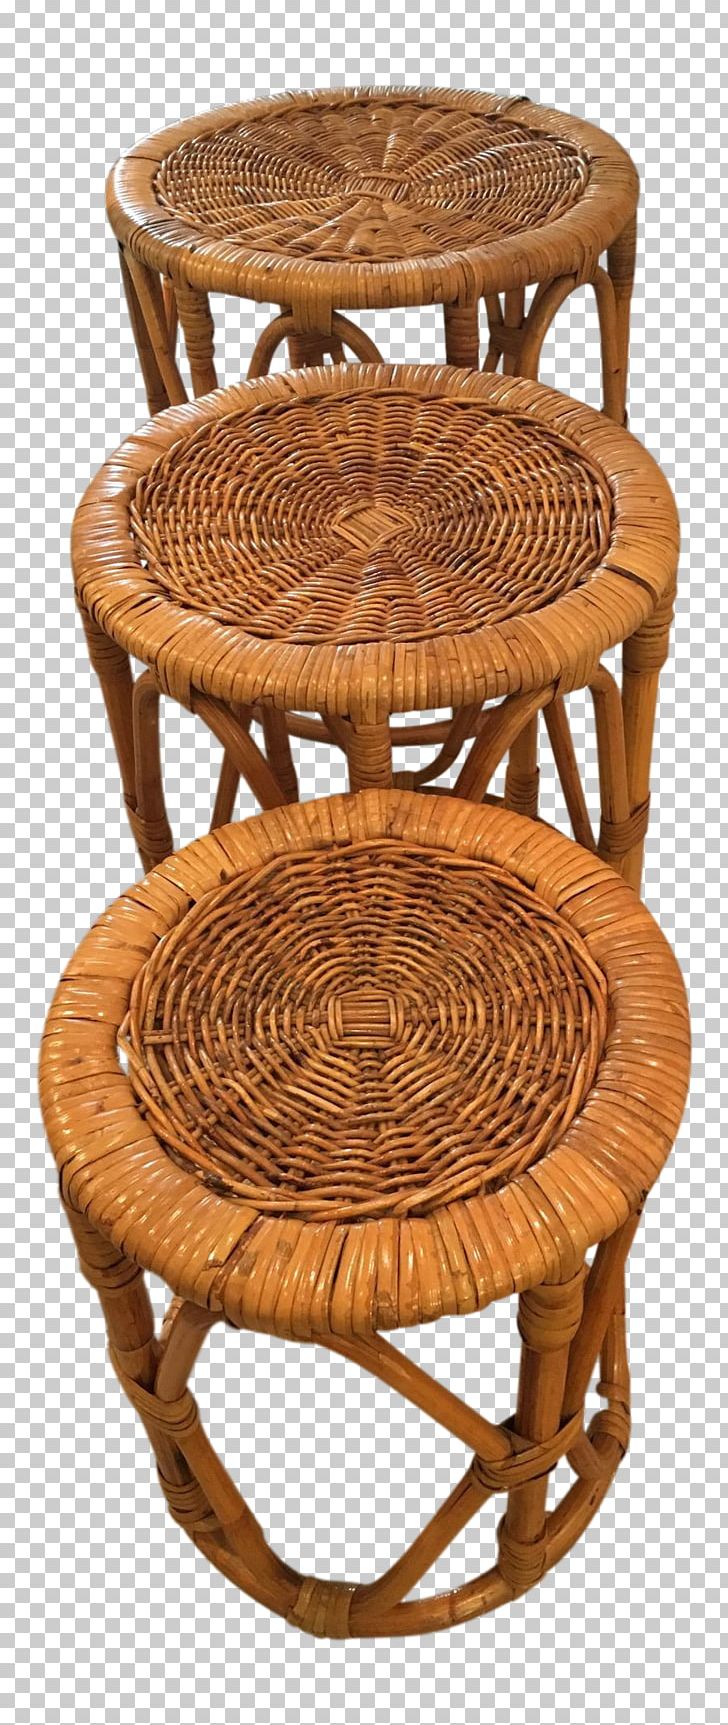 Table Wicker Chair Rattan Caning PNG, Clipart, Basket, Cane, Caning, Chair, Chairish Free PNG Download